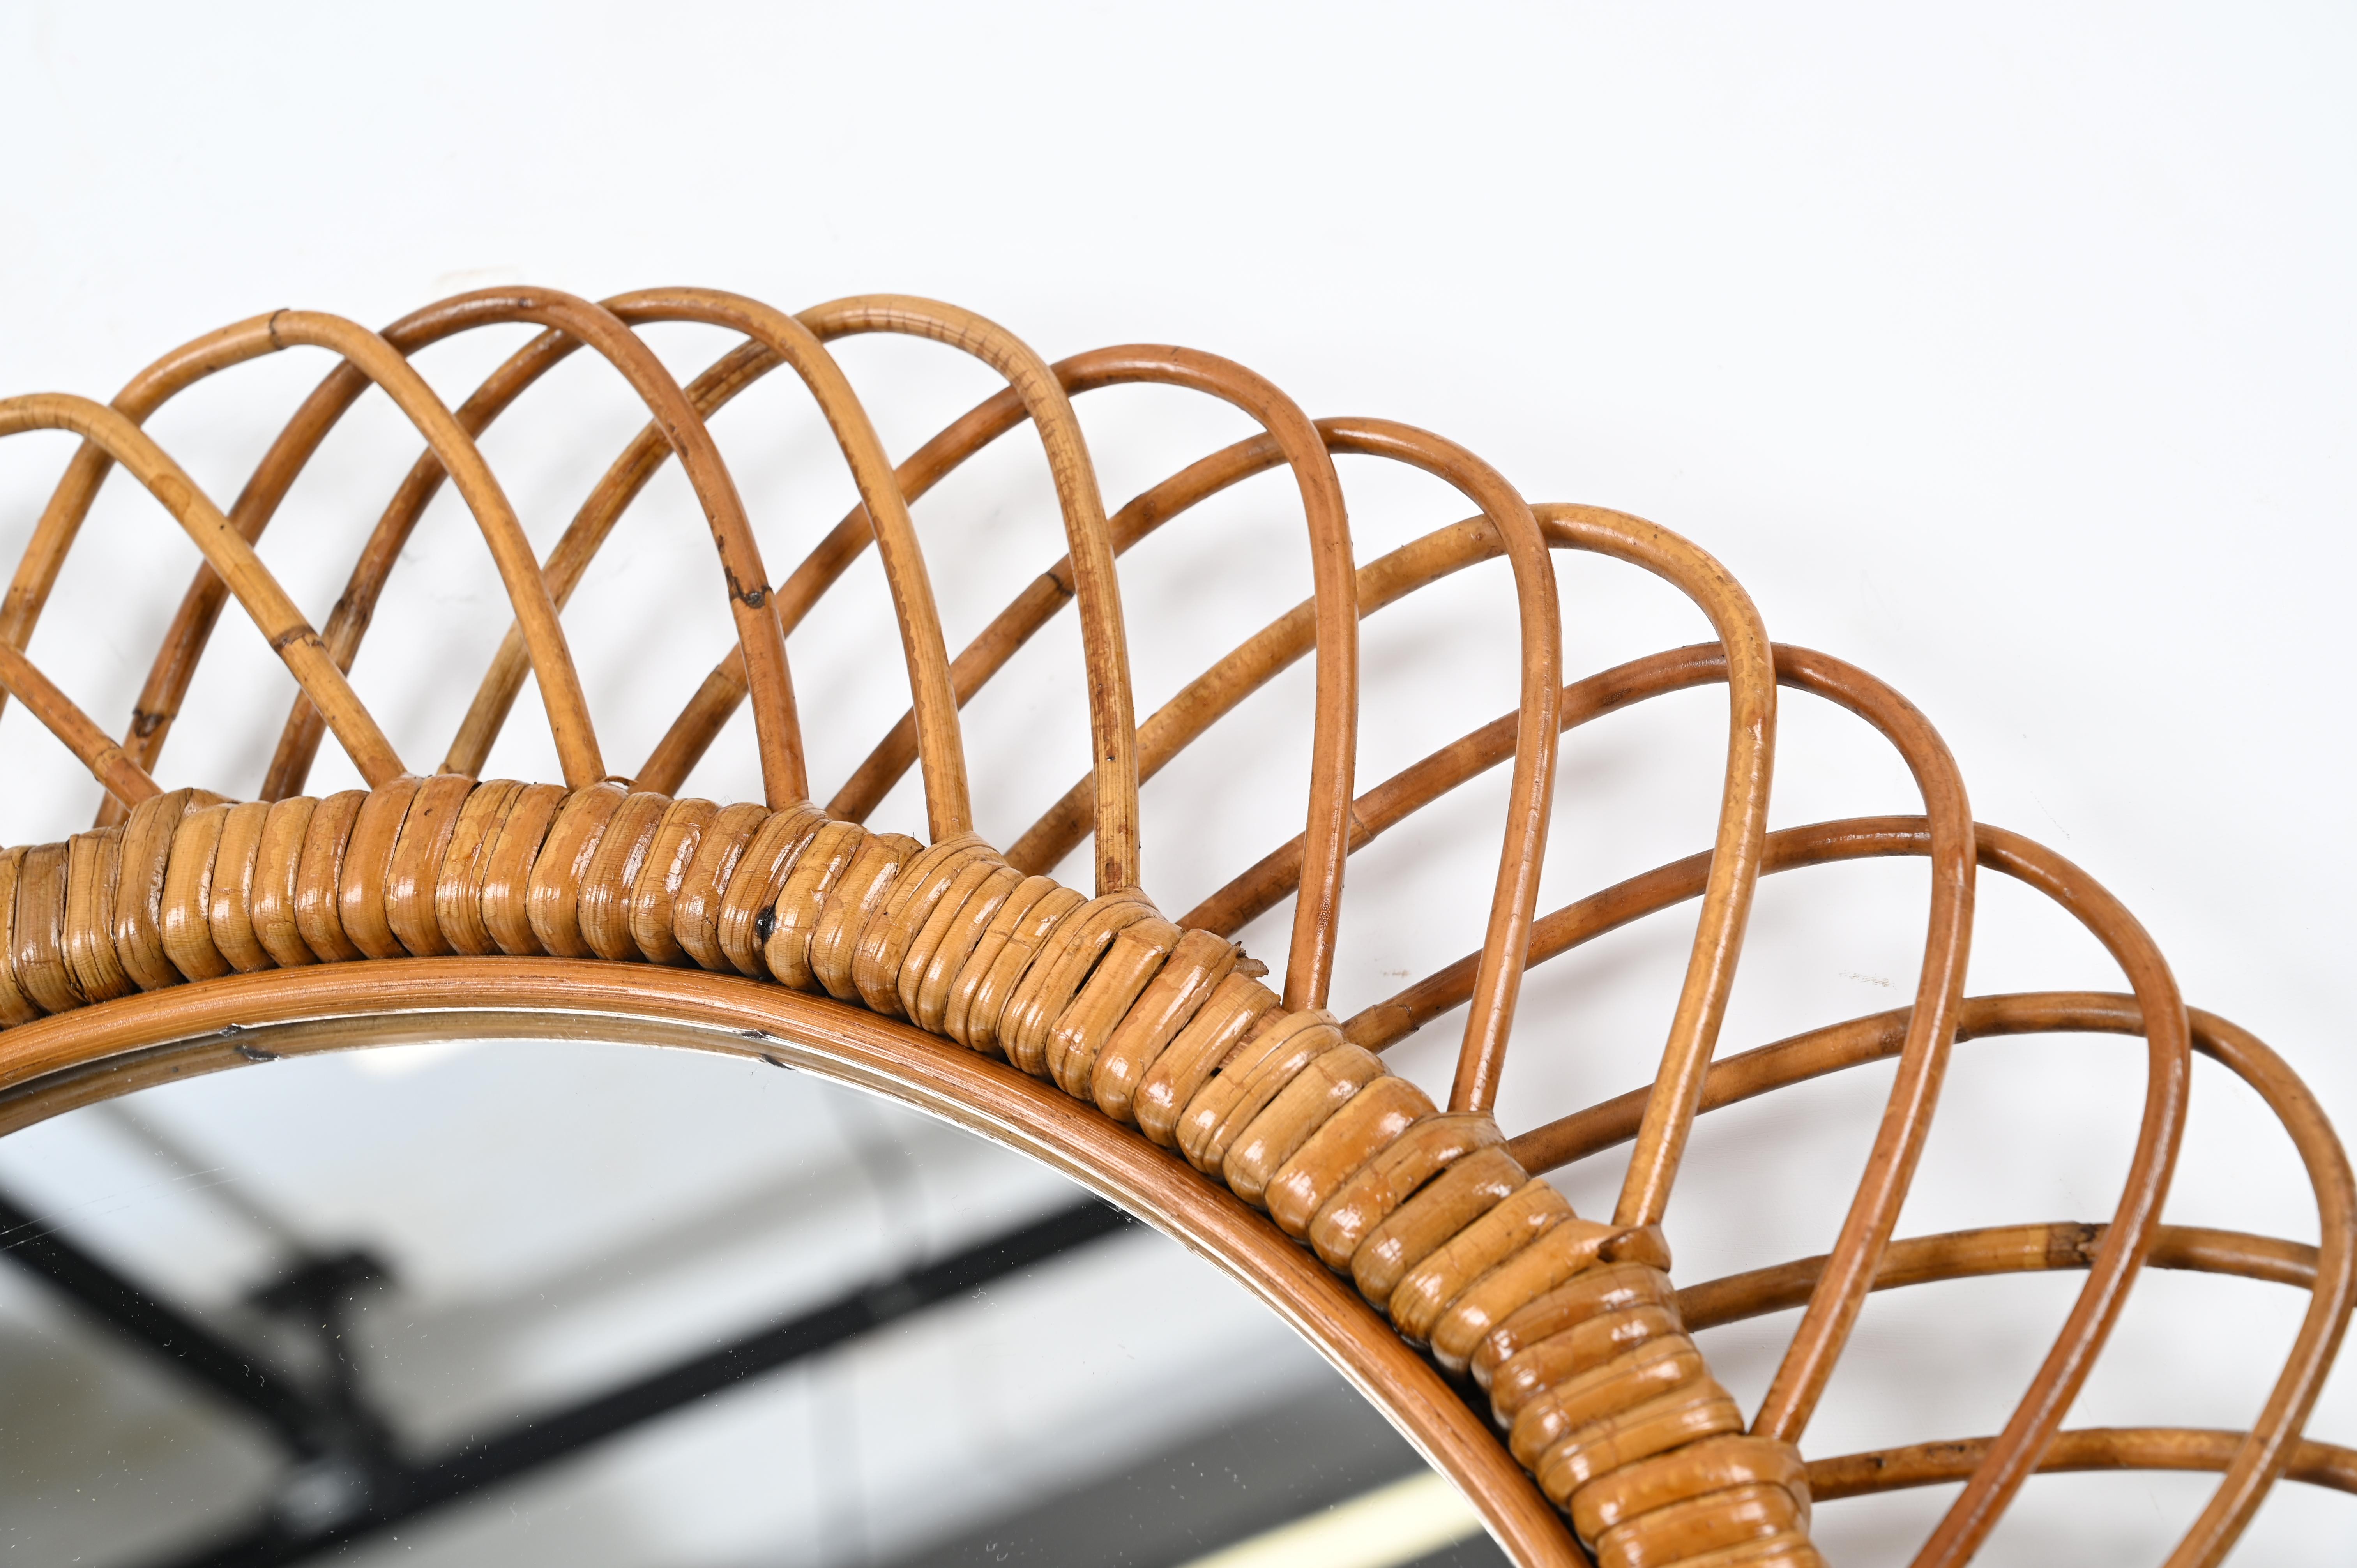 Hand-Woven Franco Albini French Riviera Round Mirror in Rattan and Wicker, Italy 1960s For Sale